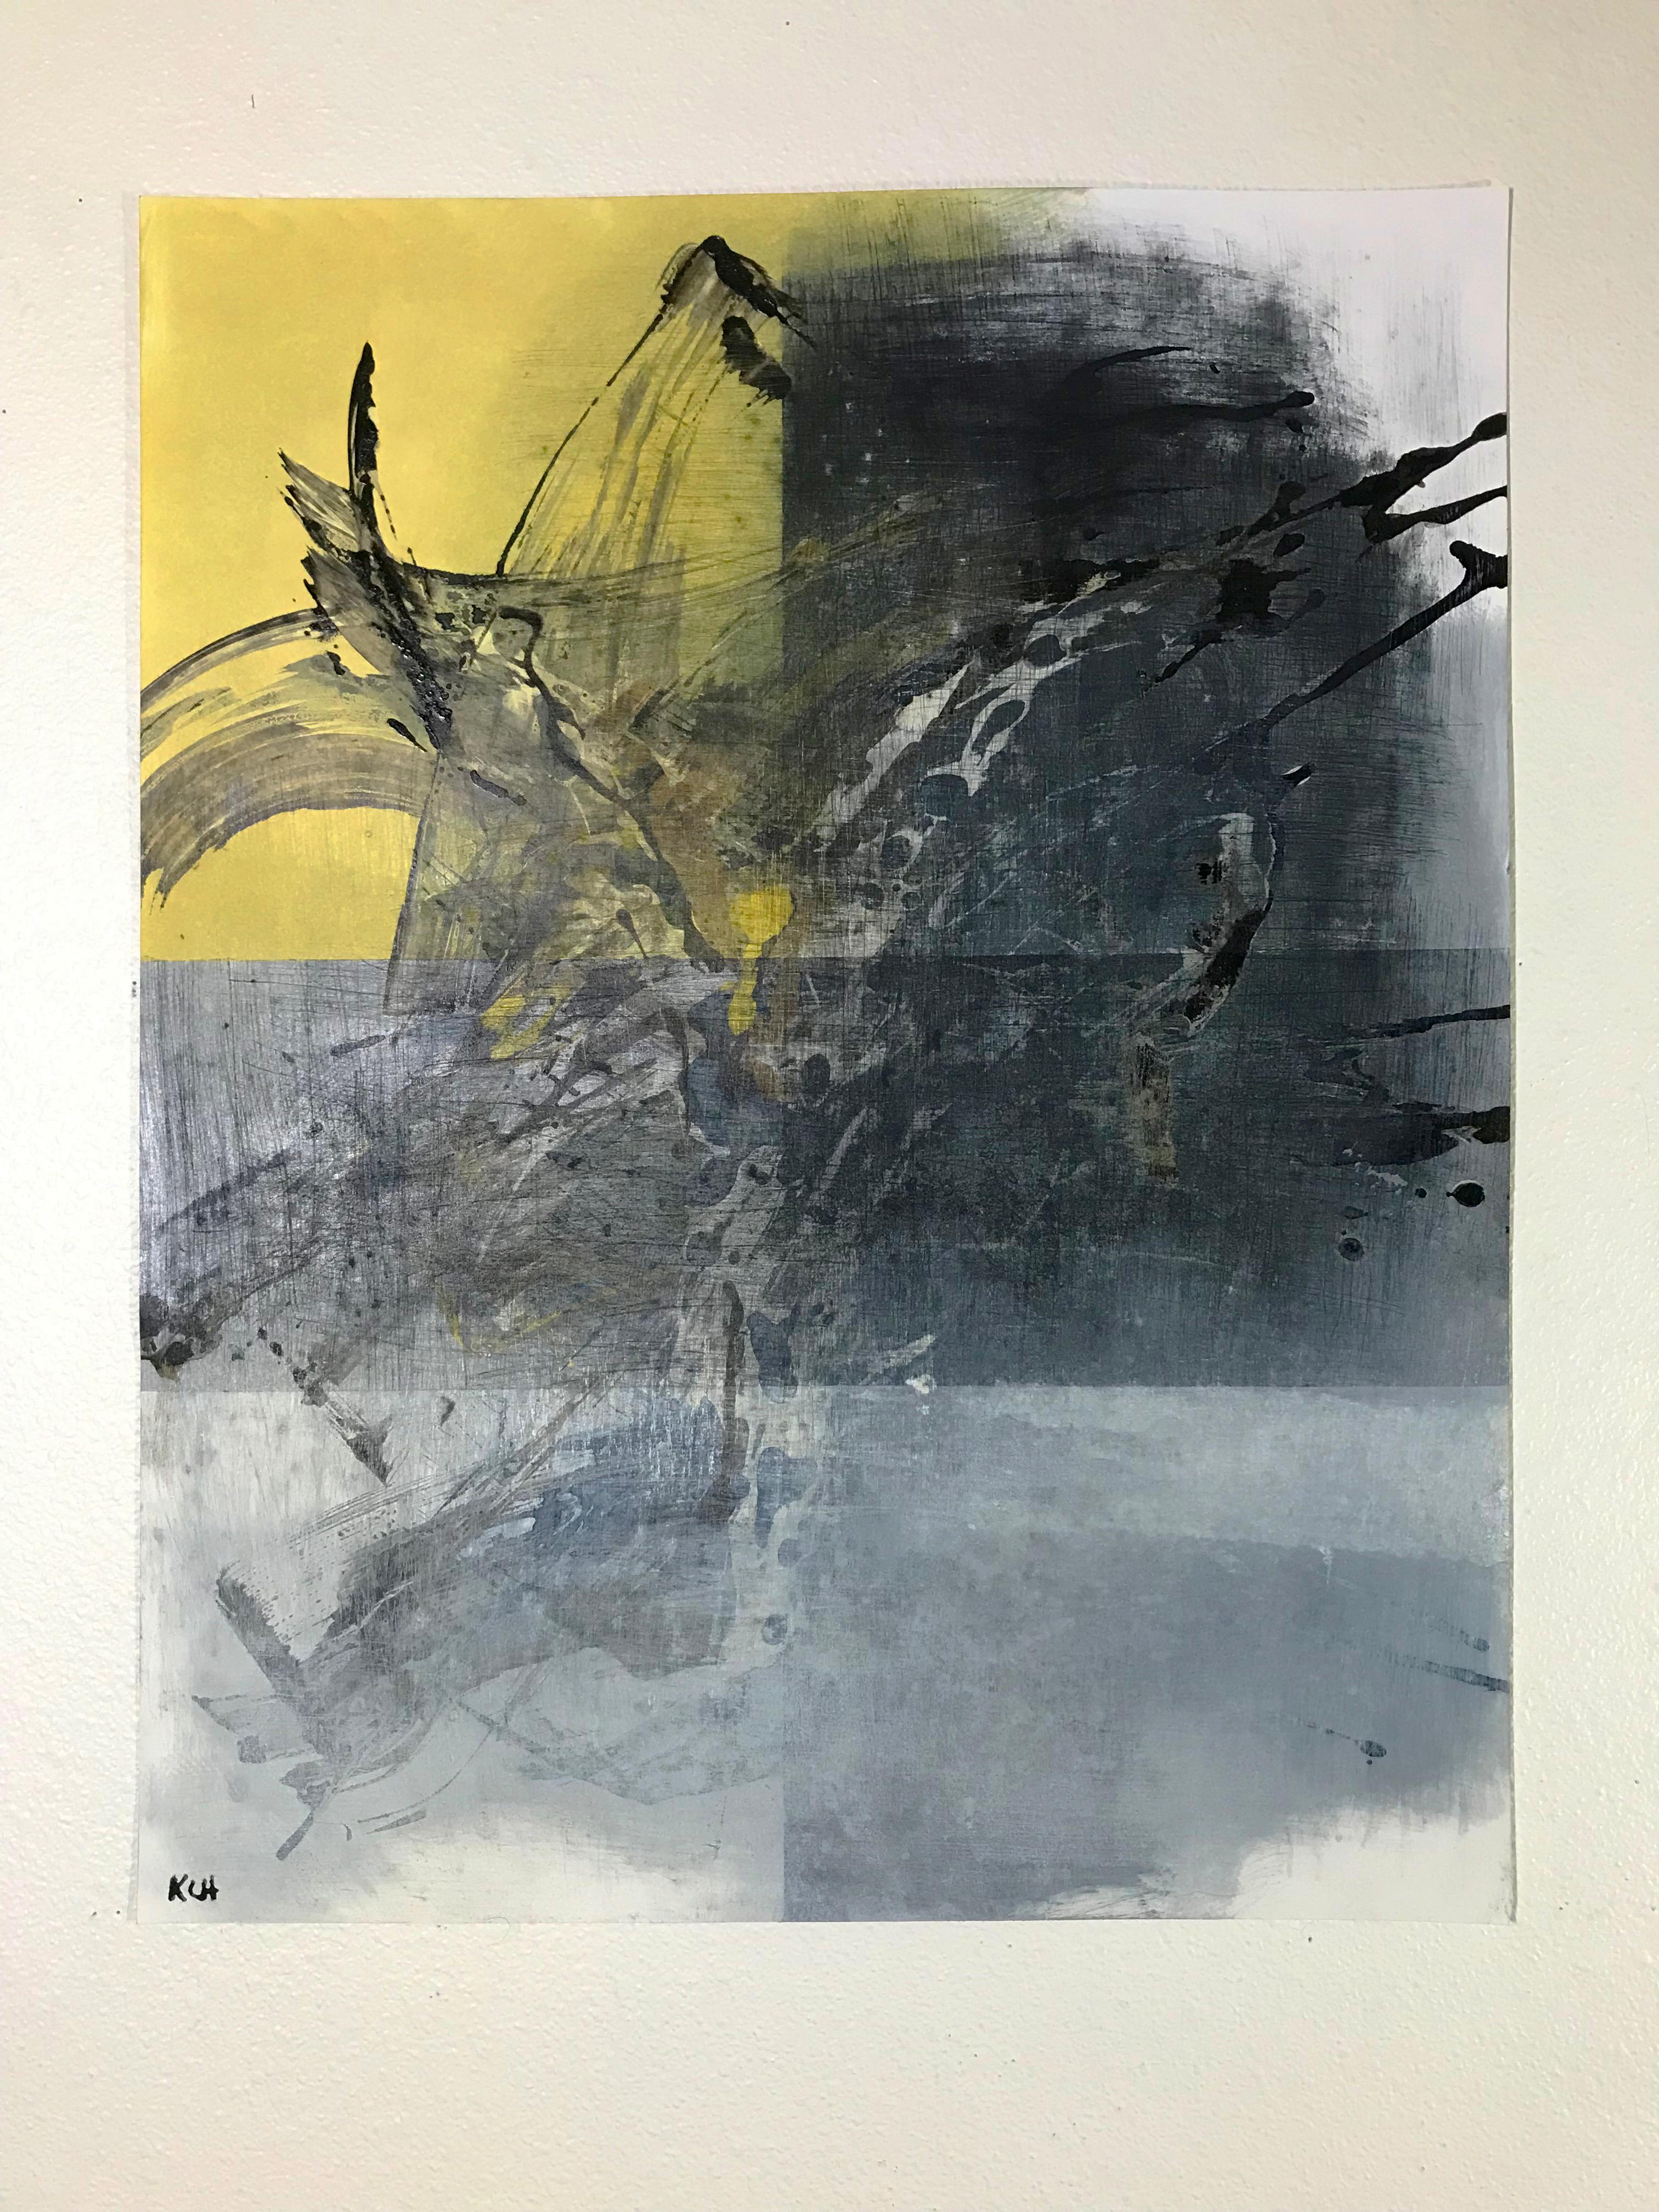 <p>Artist Comments<br>Worn and Torn is a derivative and ongoing series of artist Kris Haas' Disjointed Reality series. In this piece, abstract strokes appear in six translucent sections with varying hues from yellow to dark tones of green and blue.